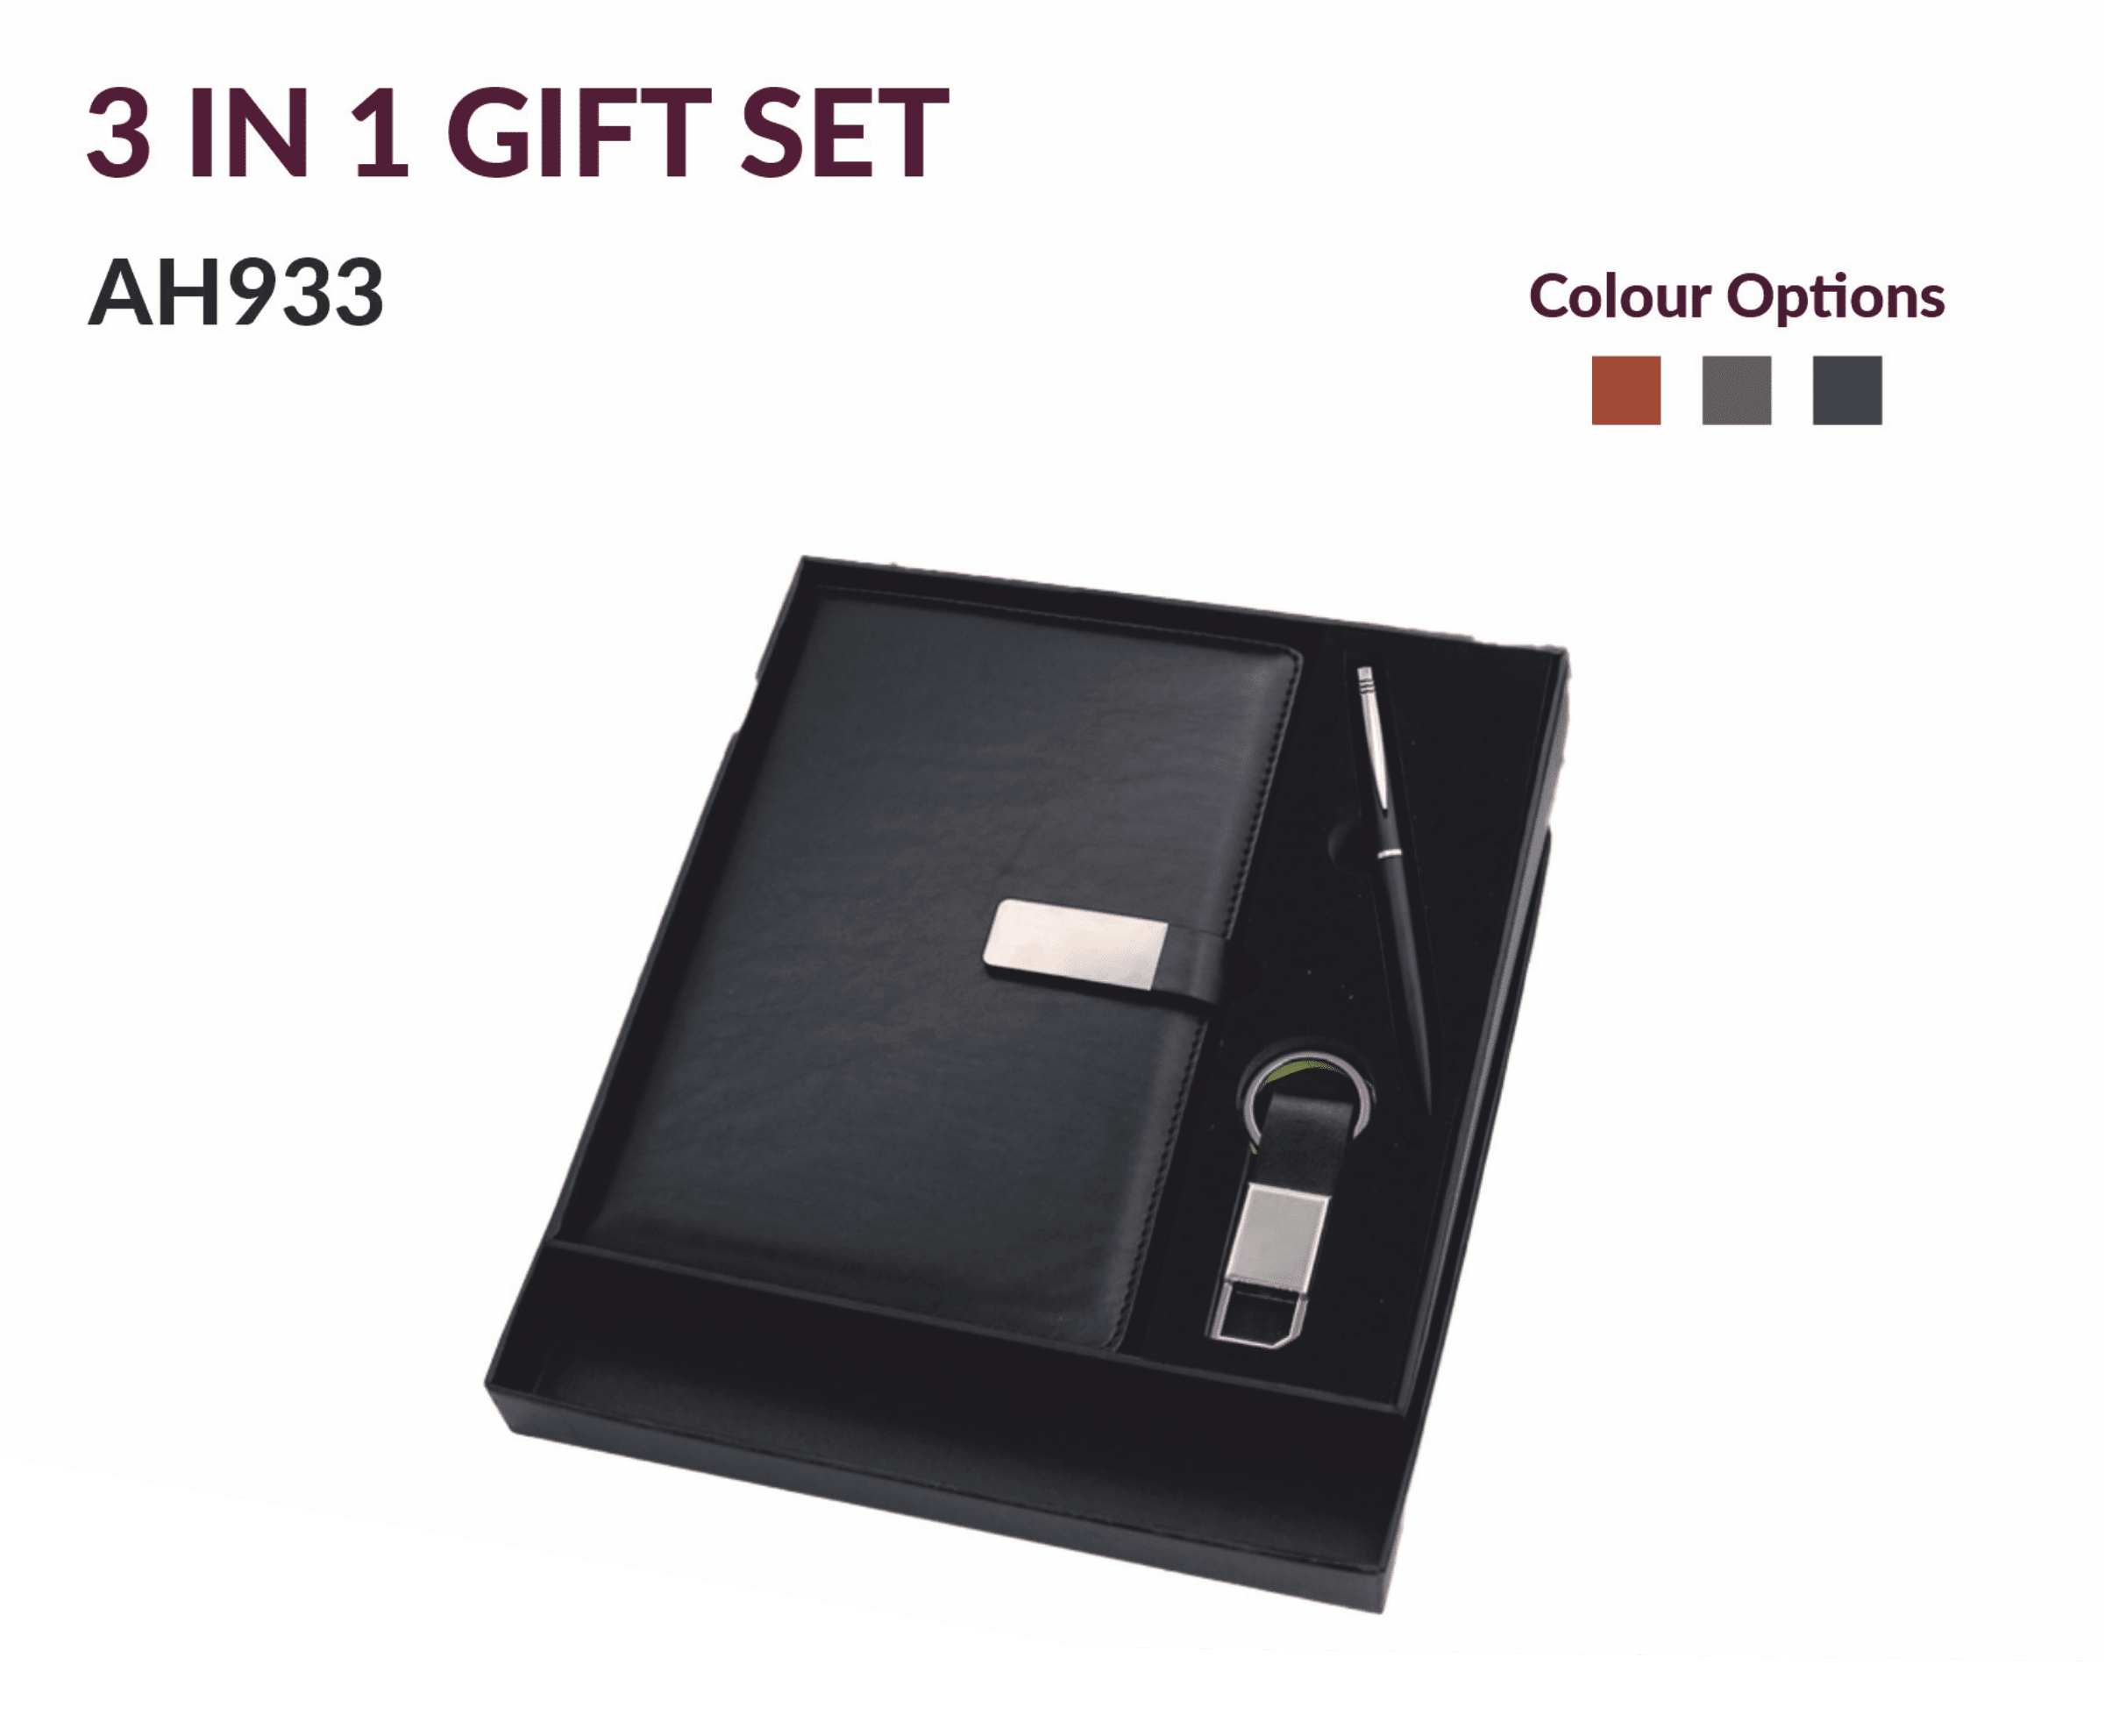 3 IN 1 GIFT SET